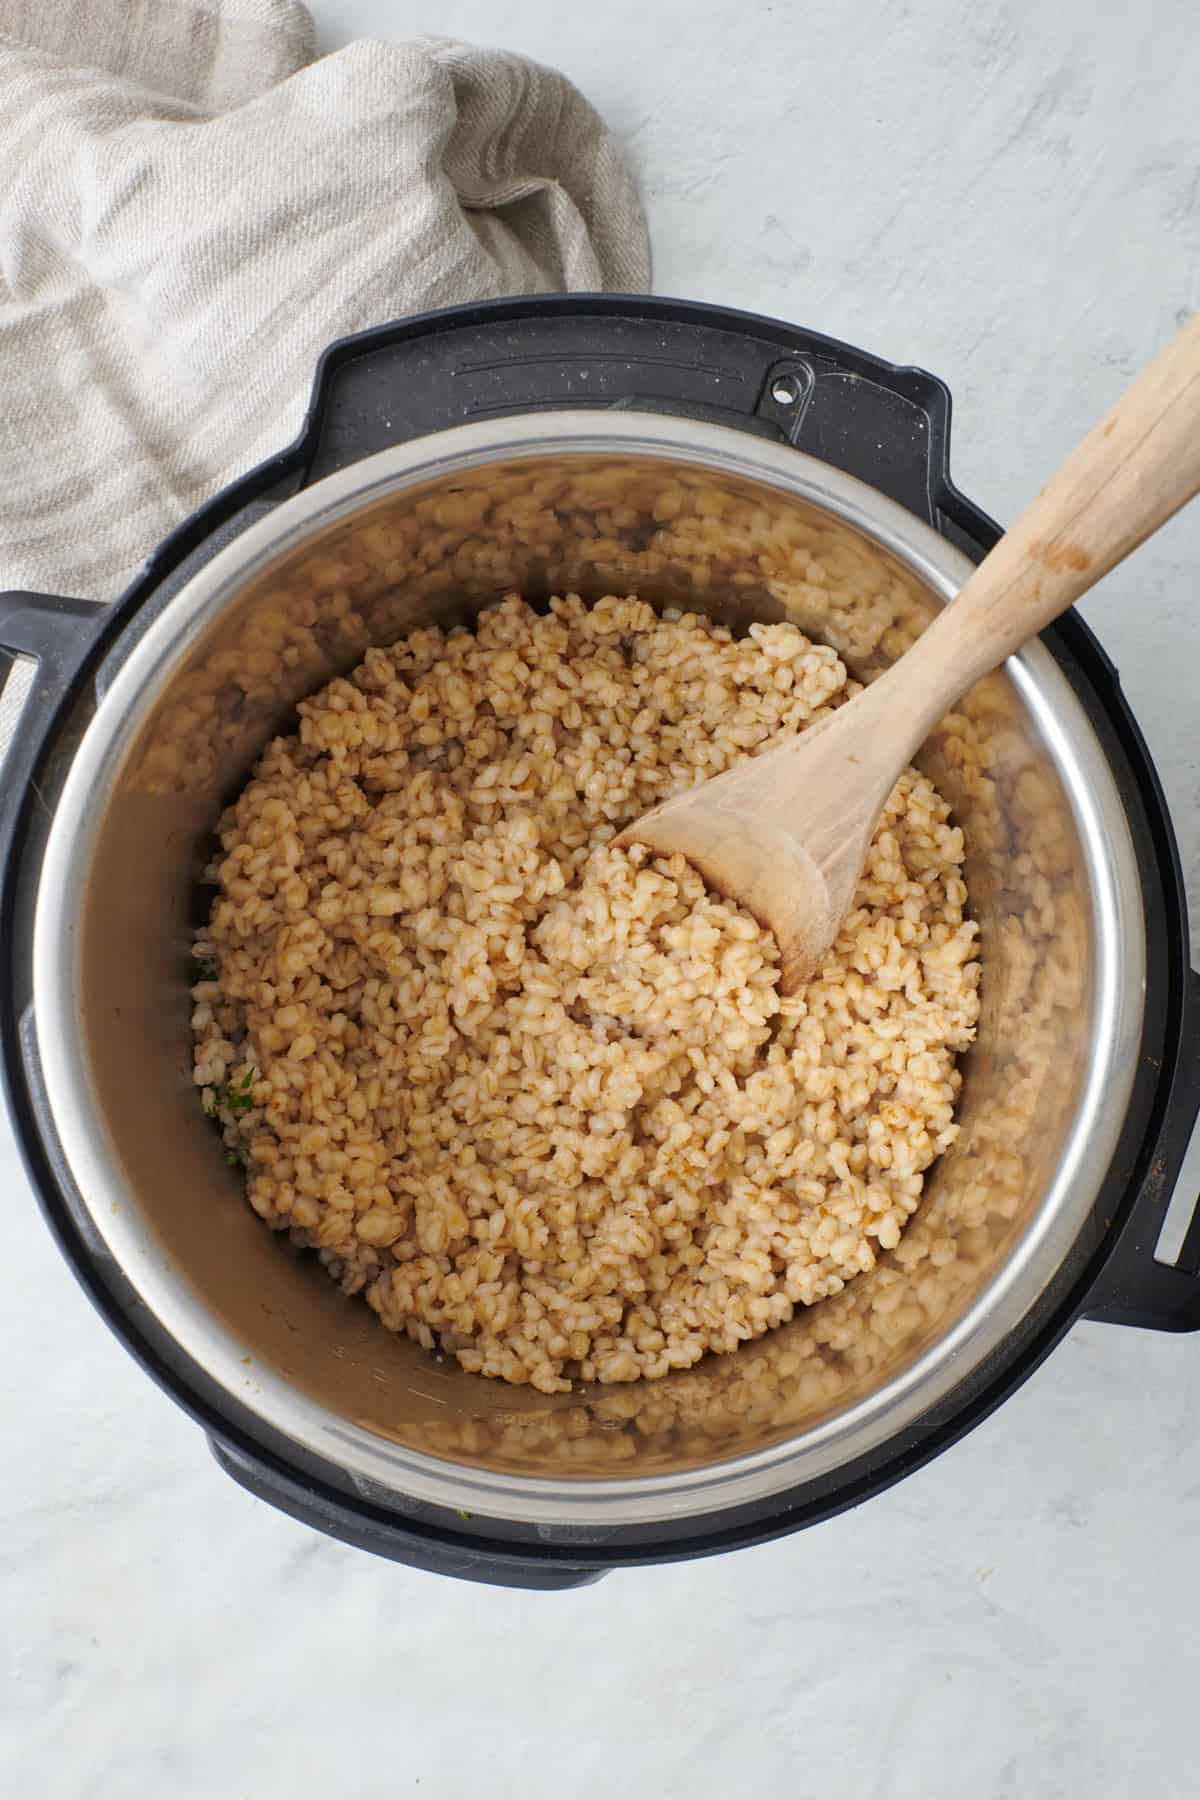 Barley in an instant pot after cooking with broth, wooden spoon dipped inside.